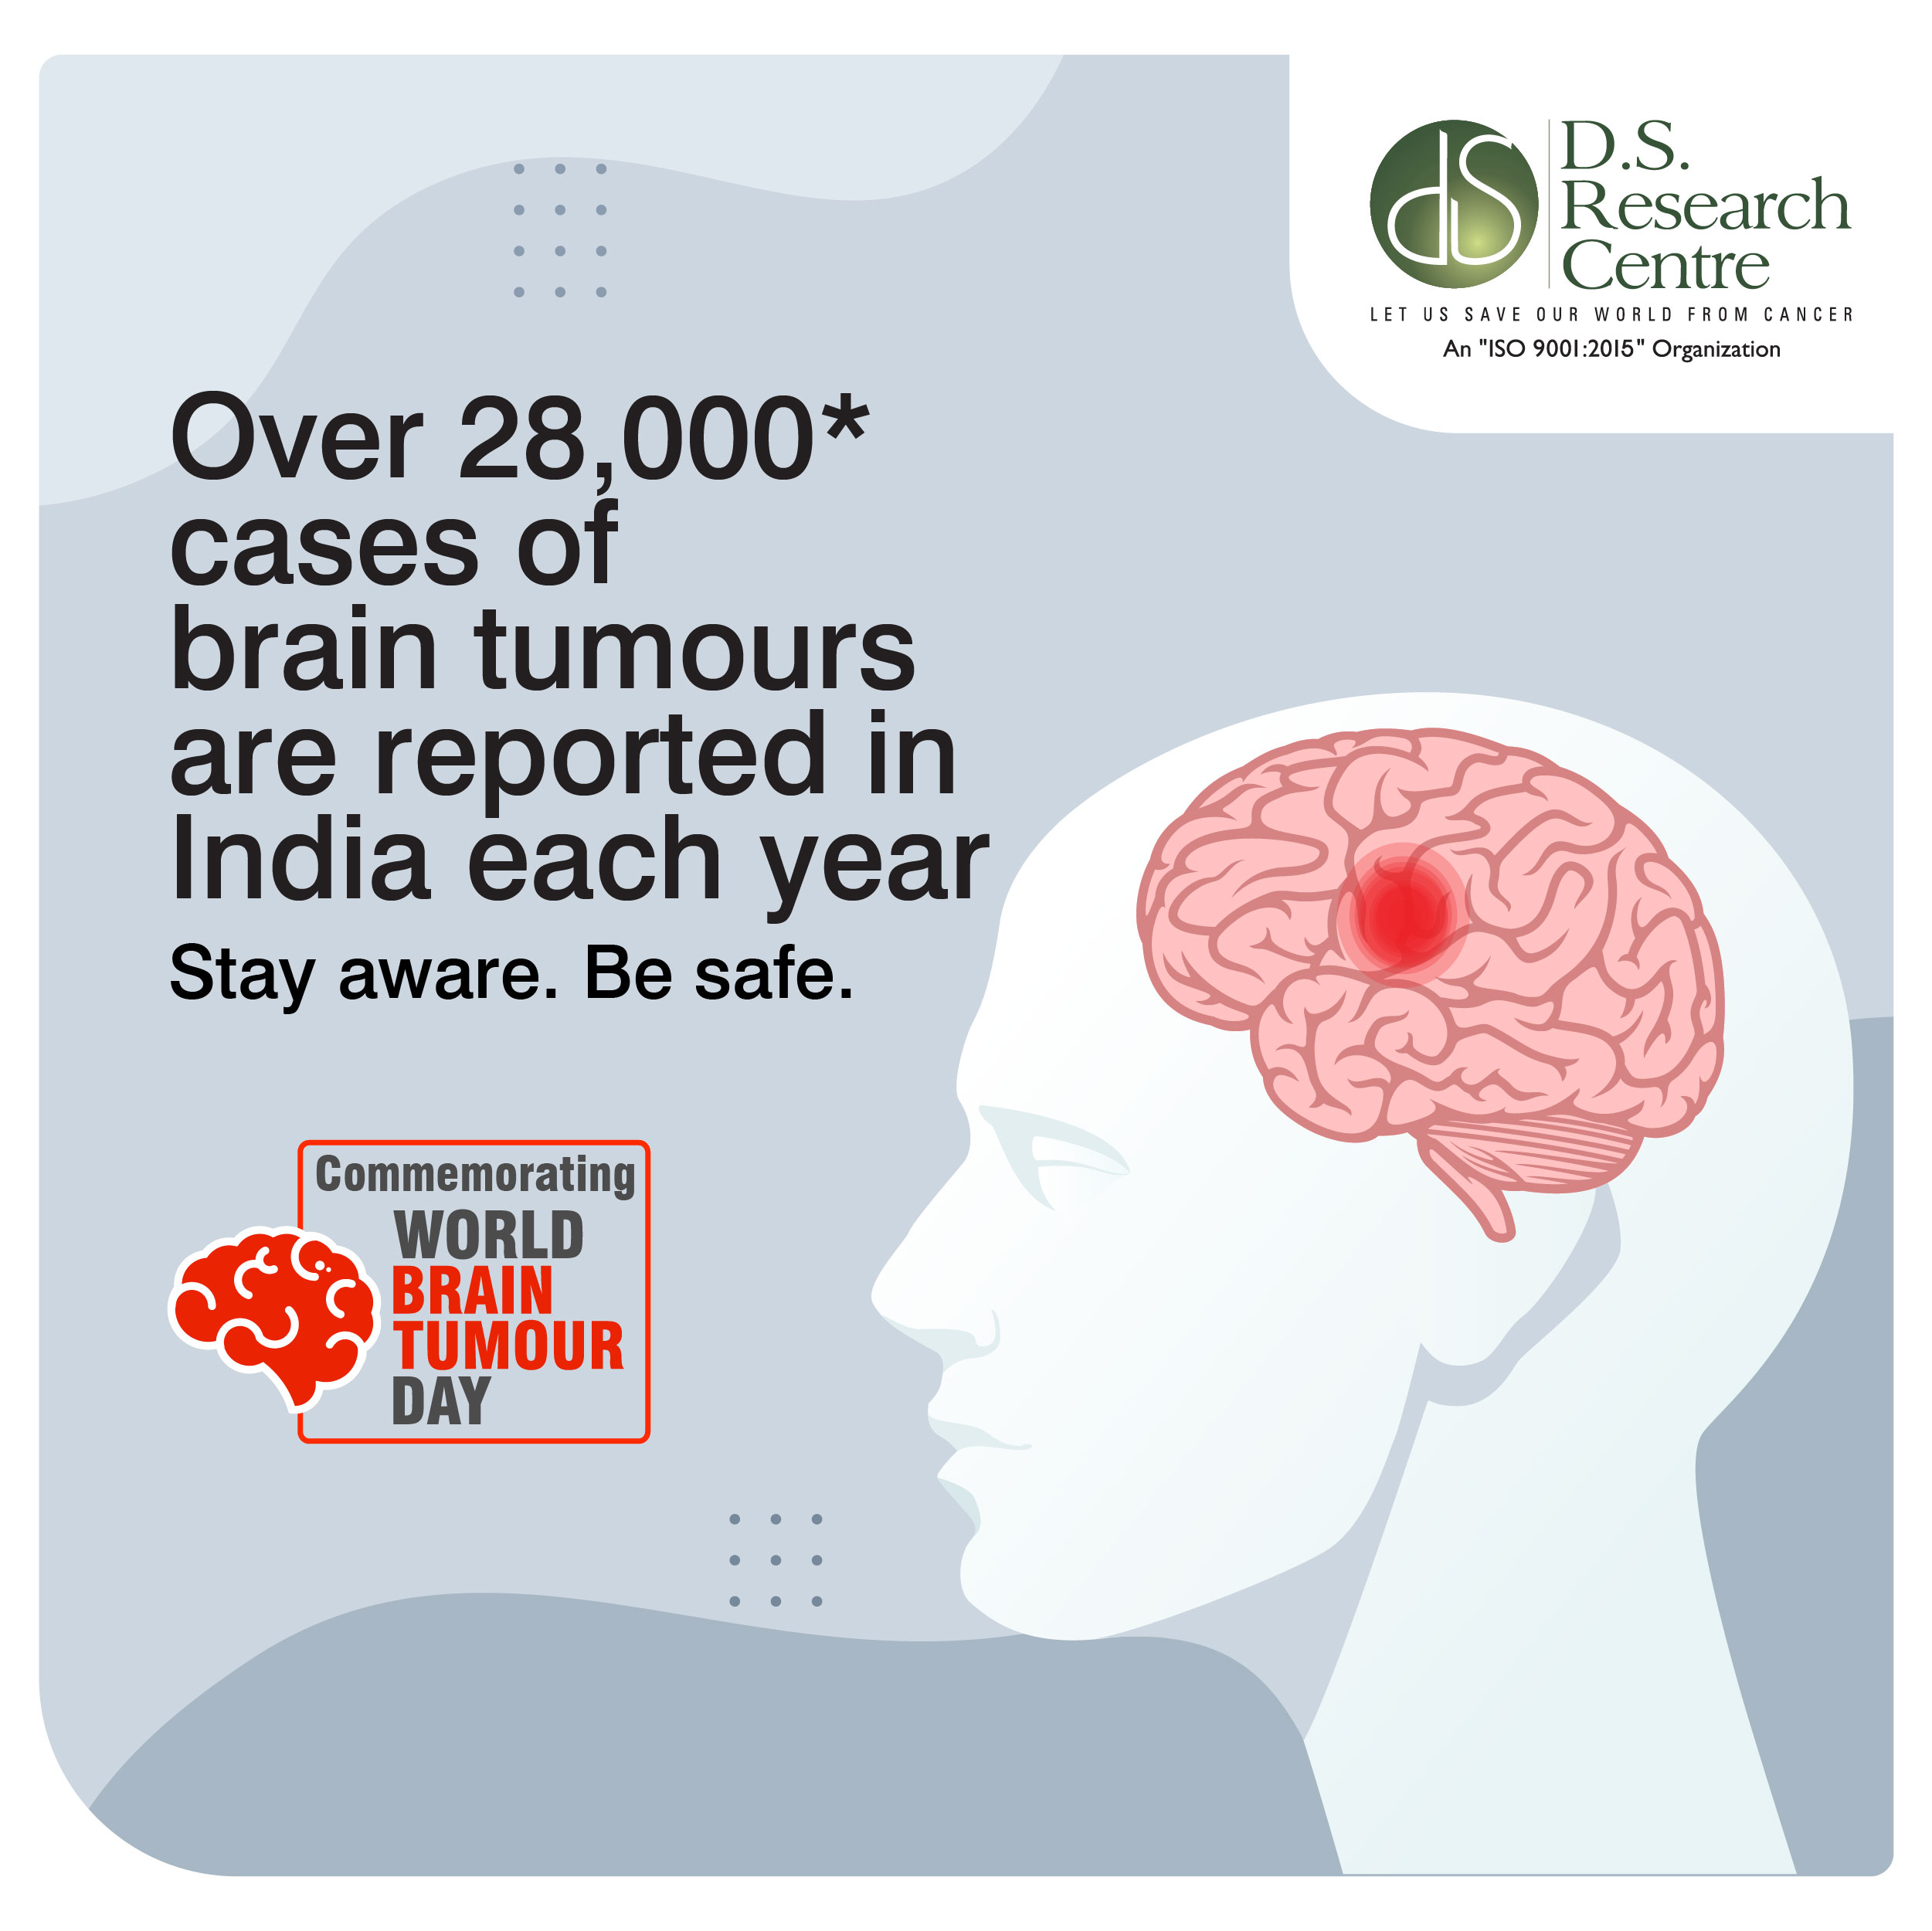 Empowering Hope and Healing on World Brain Tumor Day- The Role of Ayurveda in Brain Tumor Management